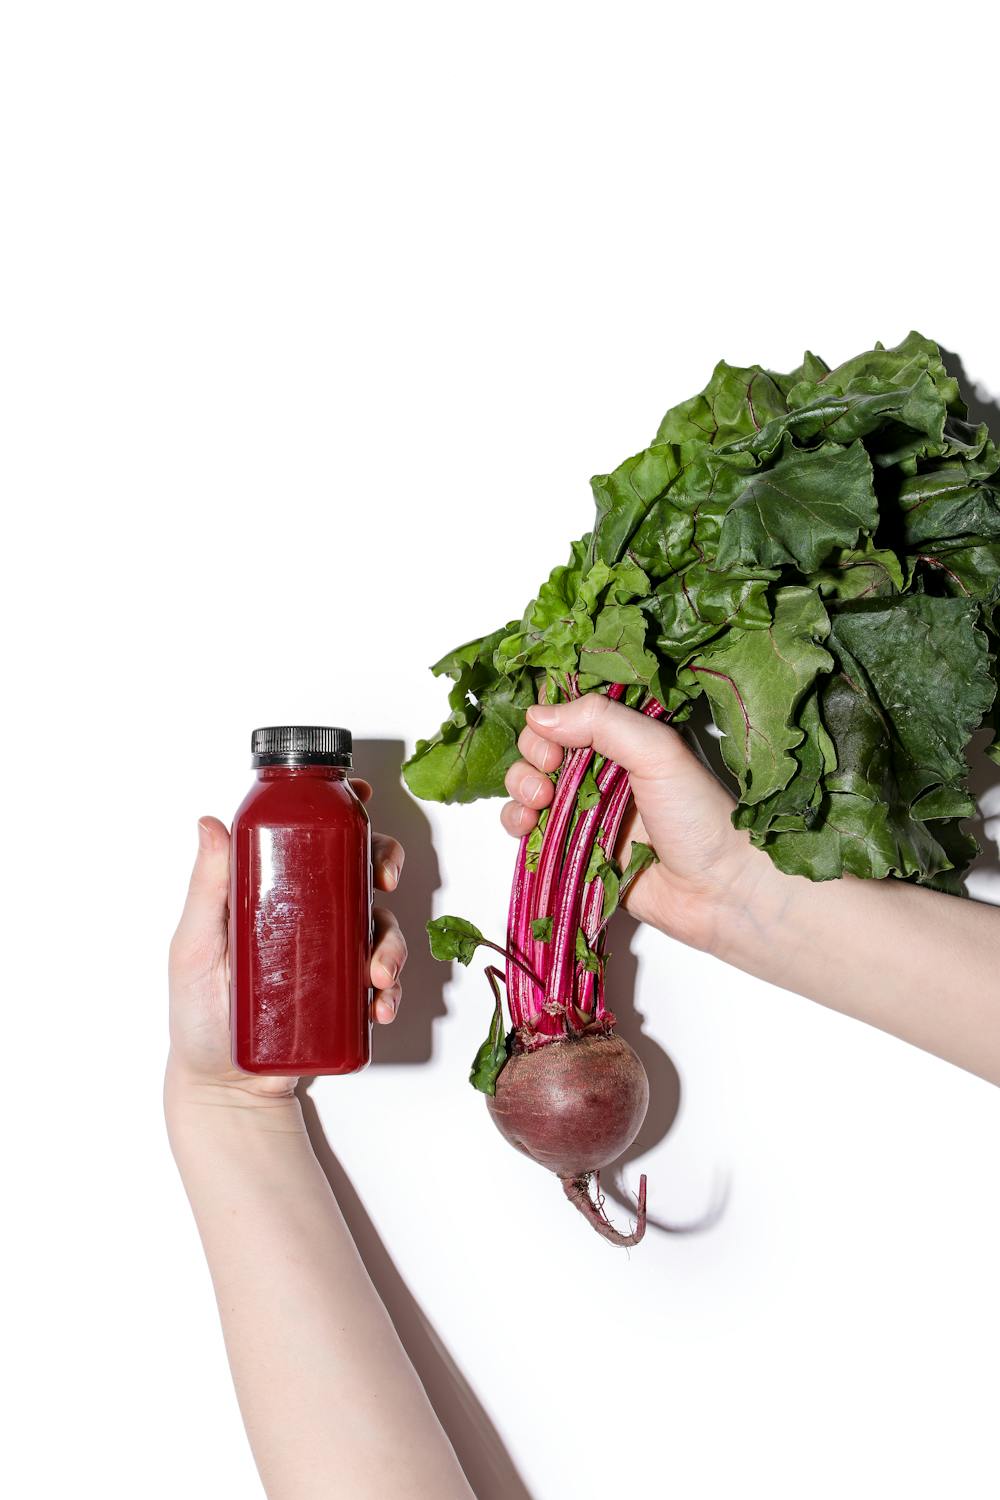 white person holding beet juice in one hand and fresh beets from the stem in the other hand on white backdrop